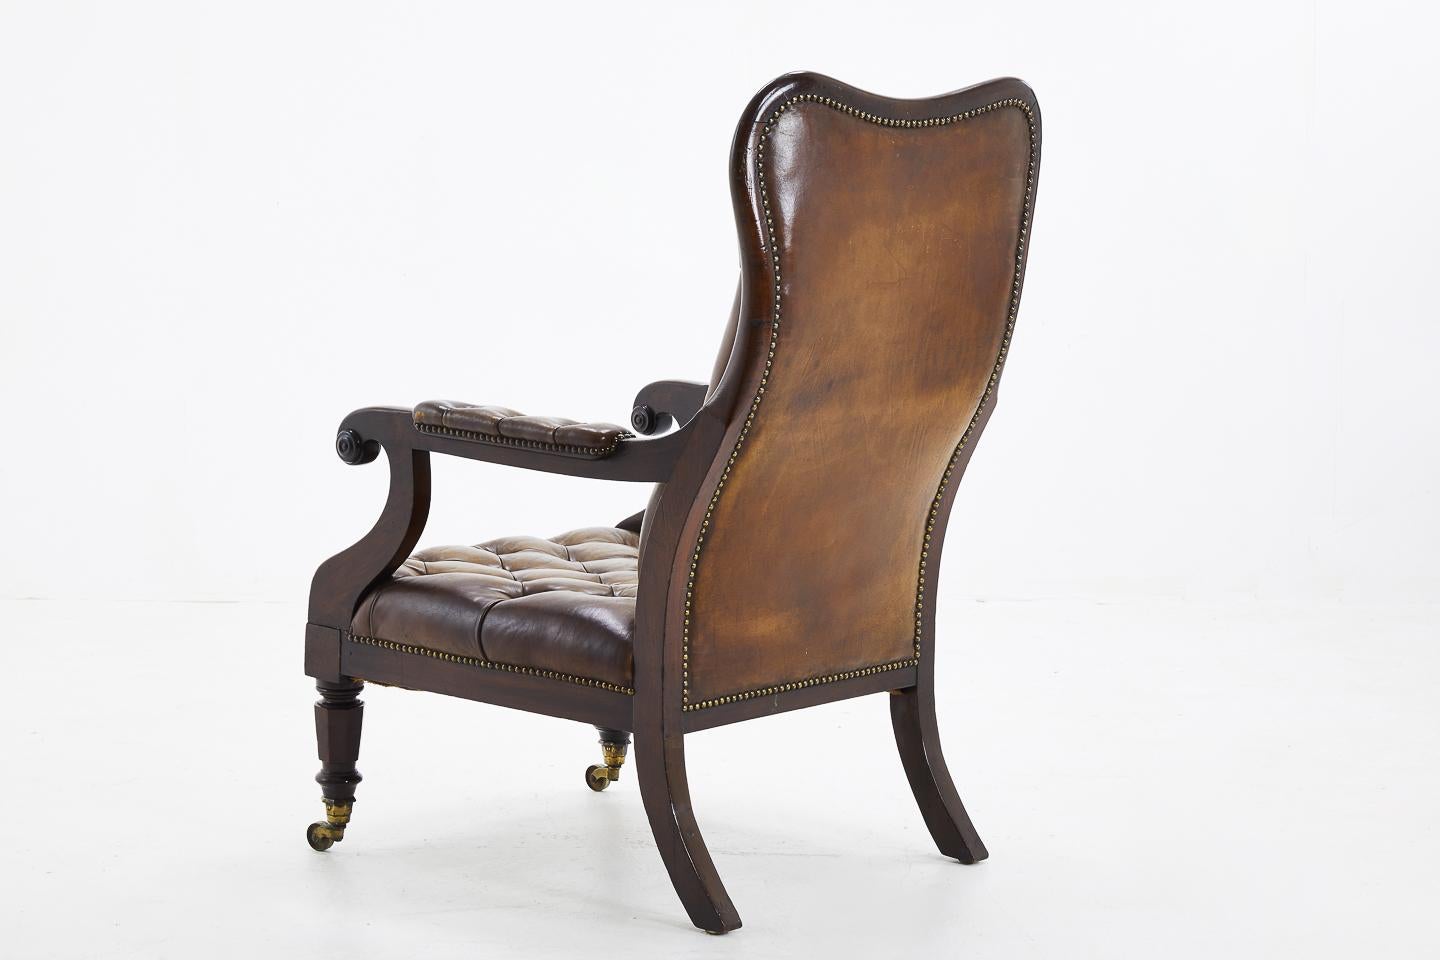 Early 19th Century Leather Chair In Good Condition For Sale In Husbands Bosworth, Leicestershire